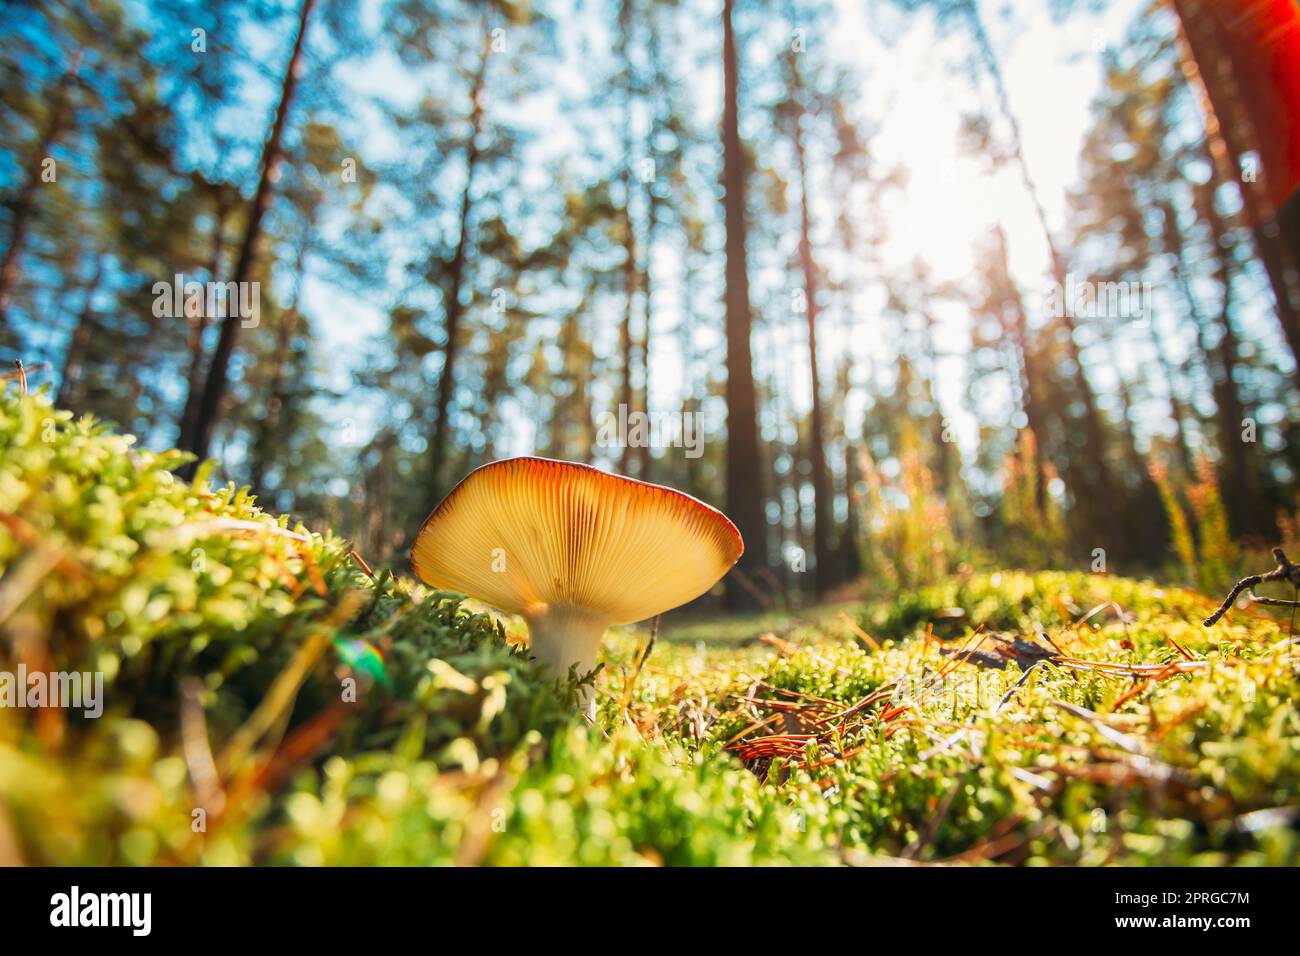 Russula Mushroom Growing Among Moss In Autumn Forest. Sunny Autumn Day Stock Photo